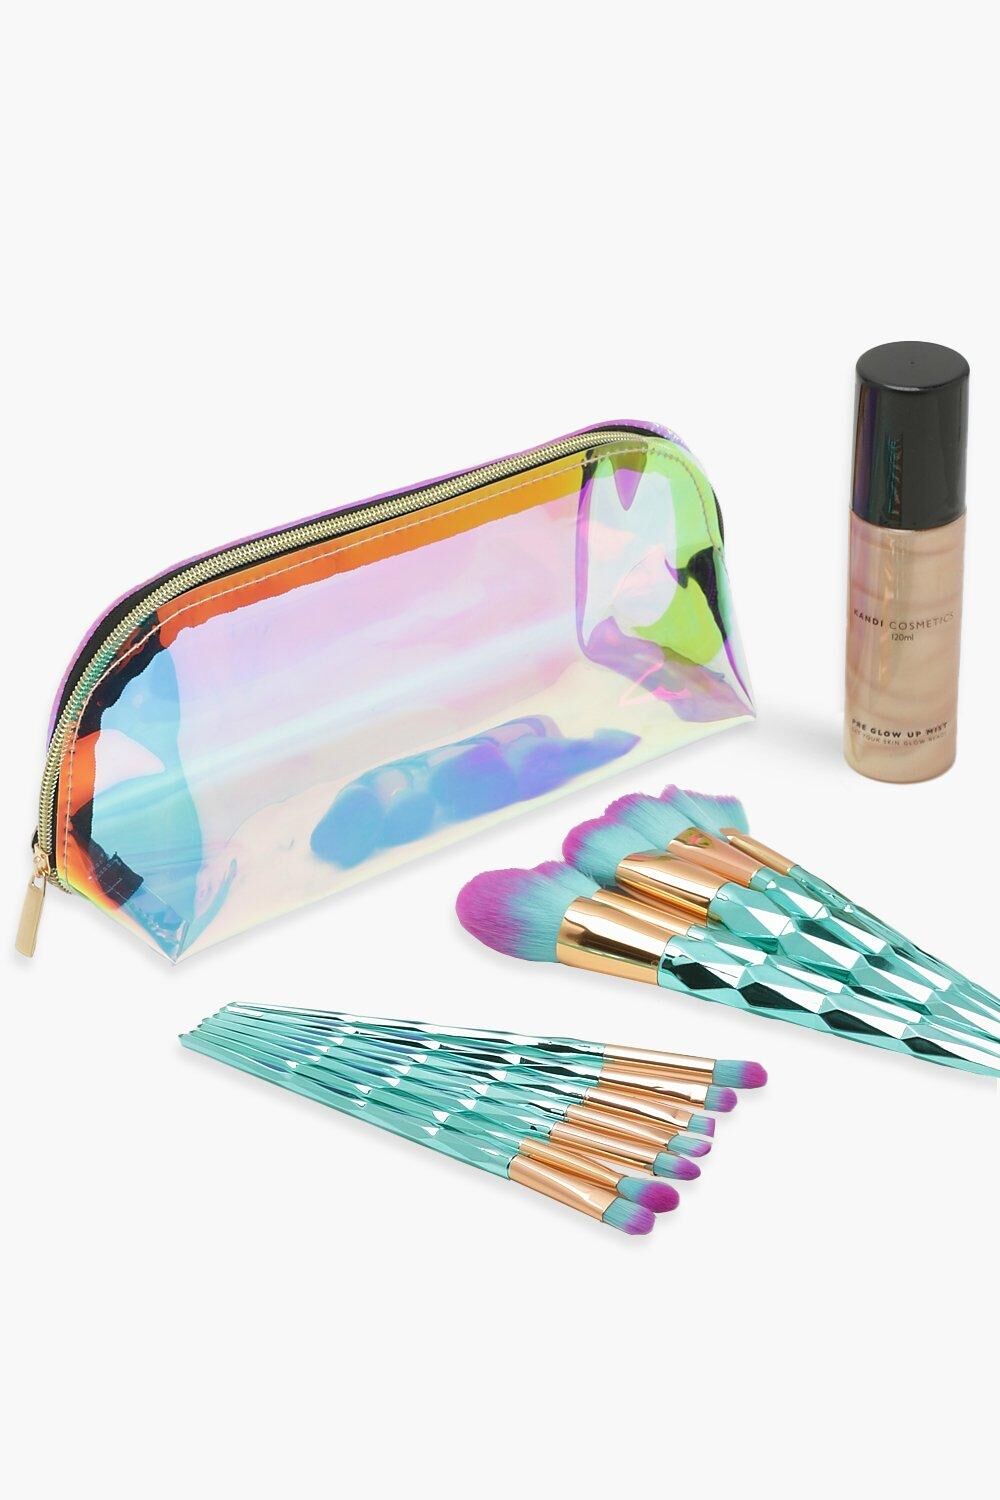 Boohoo Holographic Makeup Bag, Brush And Spray Set- Multi  - Size: ONE SIZE